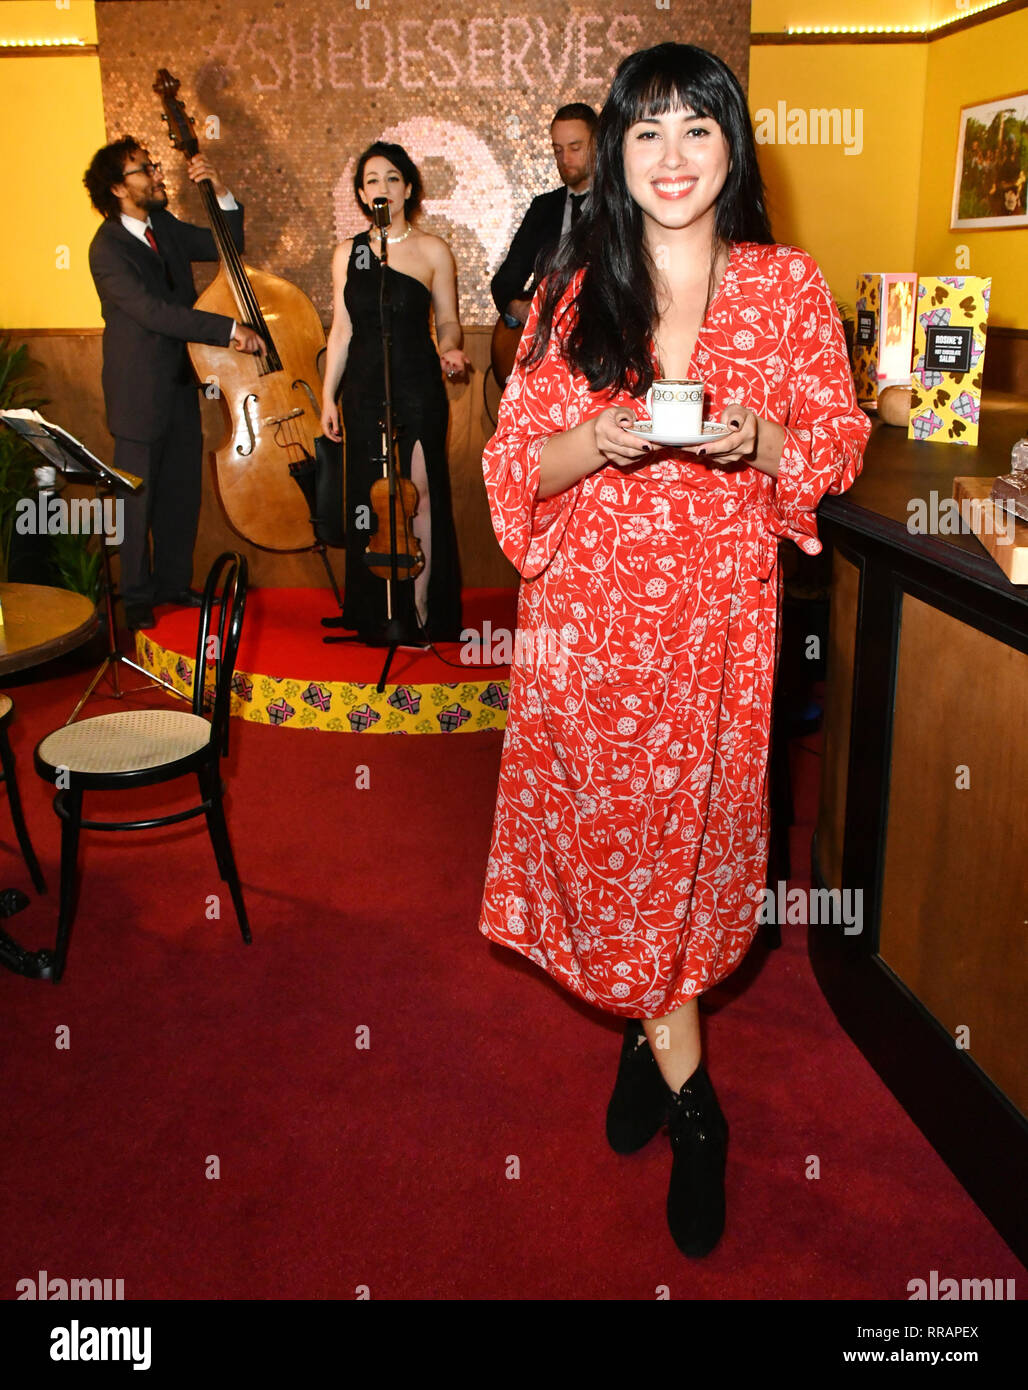 London, UK. 25th Feb 2019. Melissa Hemsley, chefs and influencers mark  launch of hot chocolate salon, hidden behind a secret door in Rosine's  newsagents in Shoreditch, which opens to mark the start